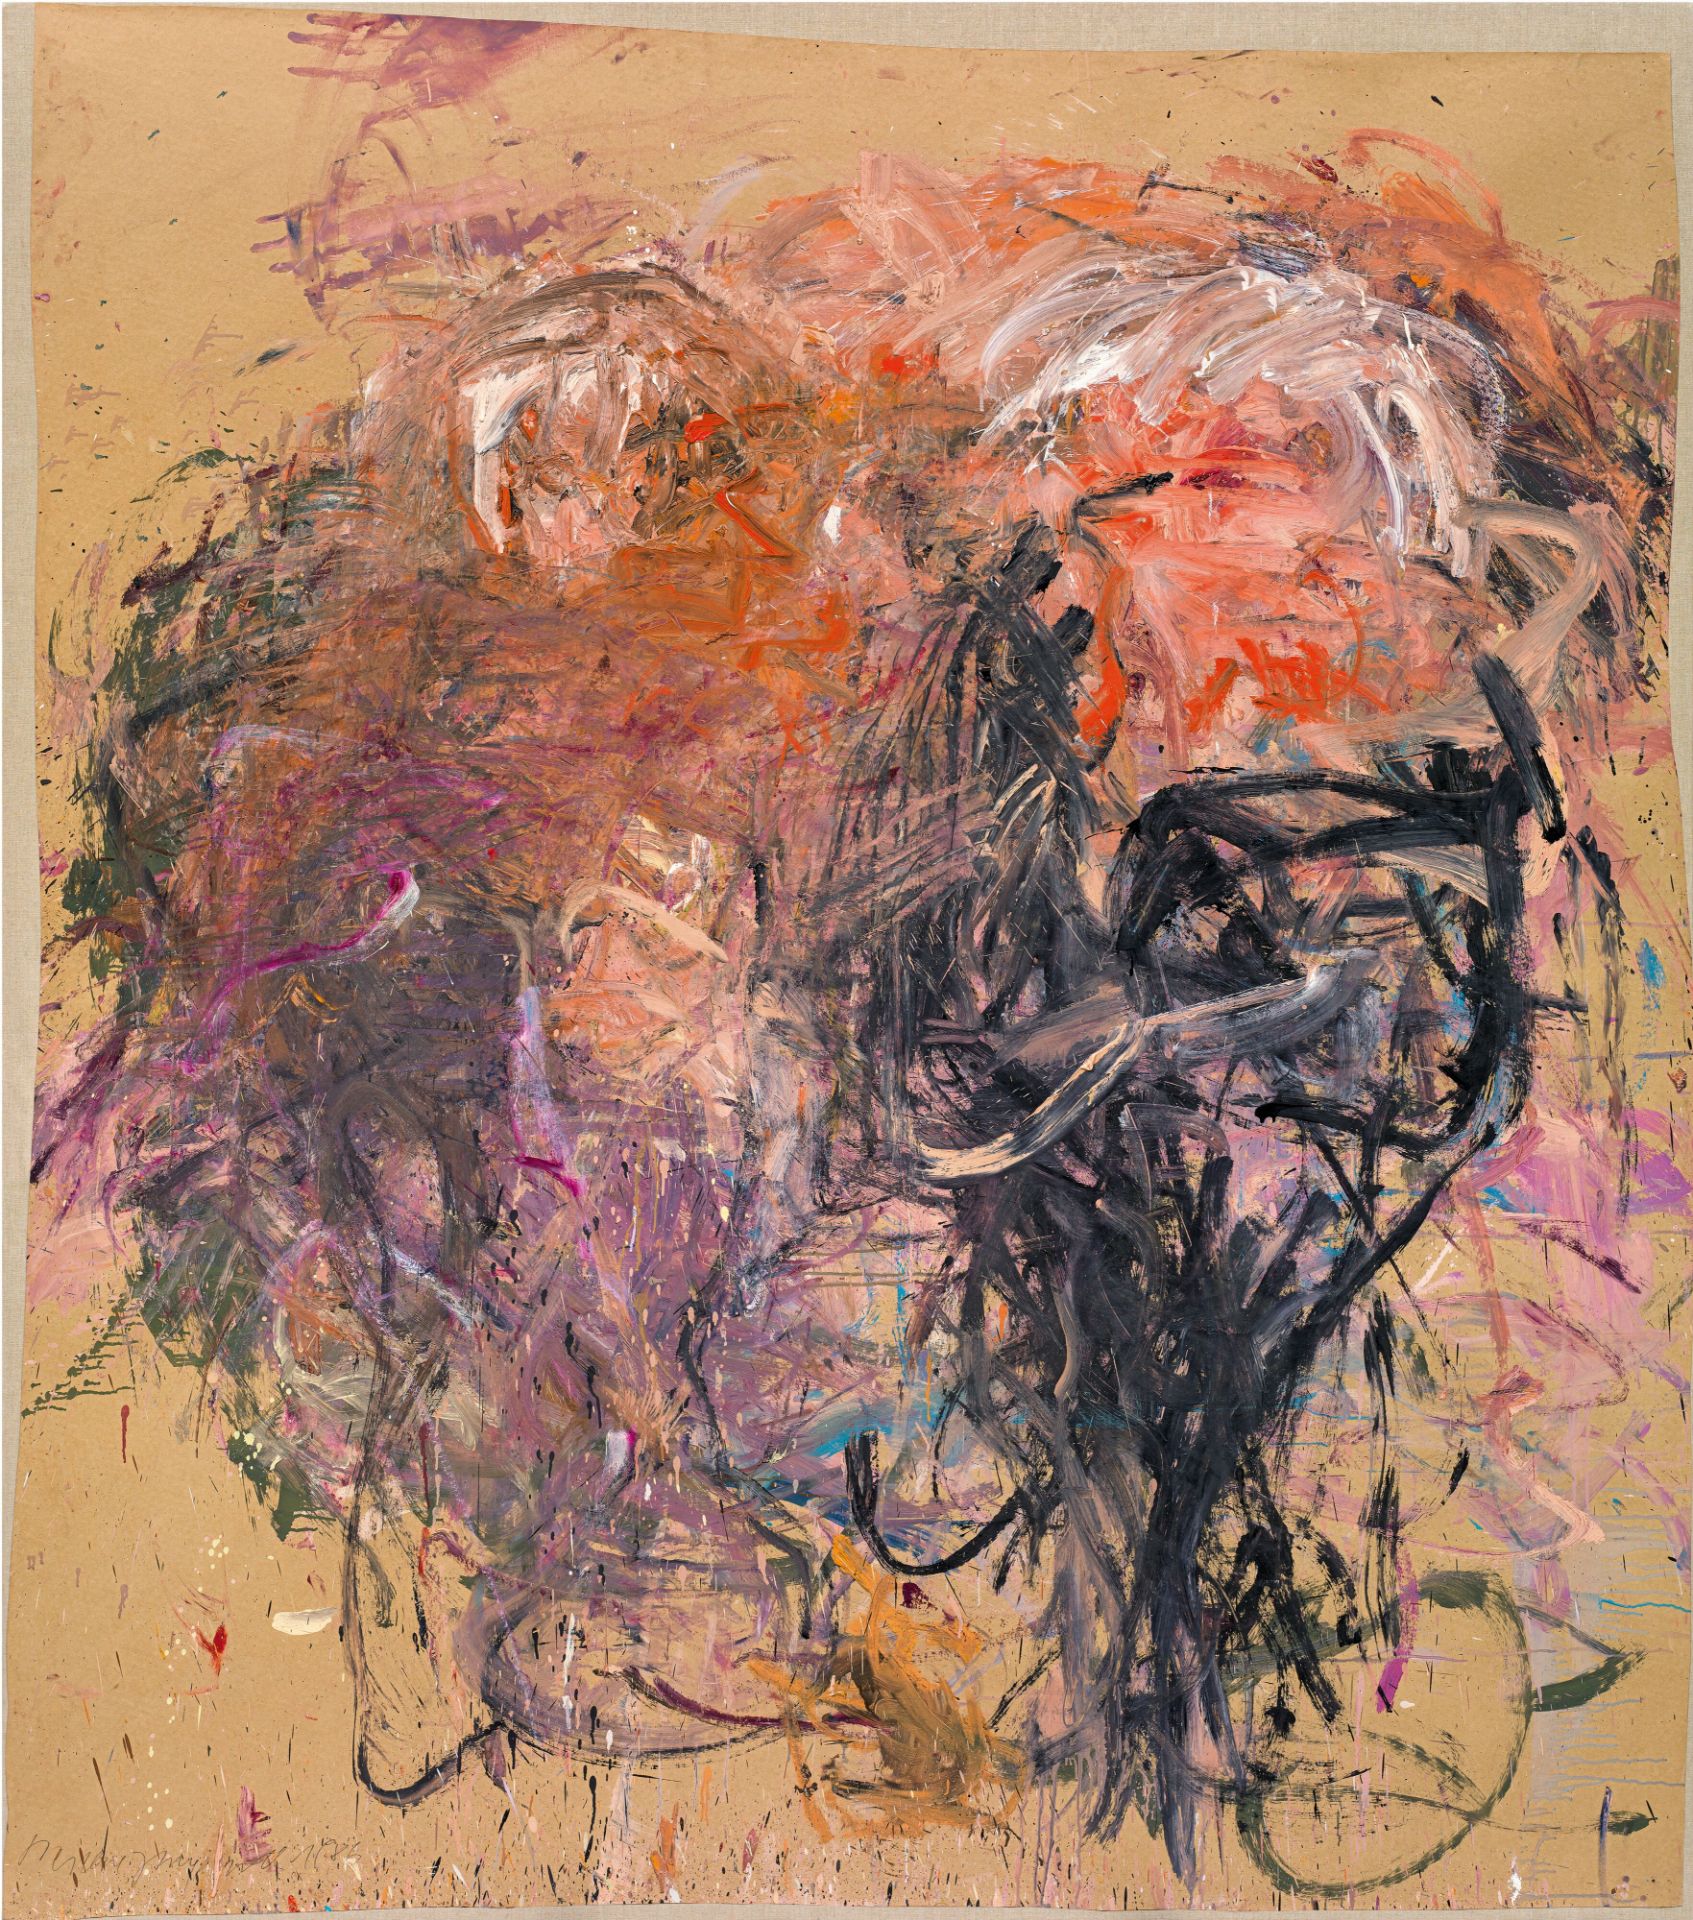 Martha JungwirthUntitled1986oil on thin cardboard, on canvas; unframed212 x 184 cmsigned and dated